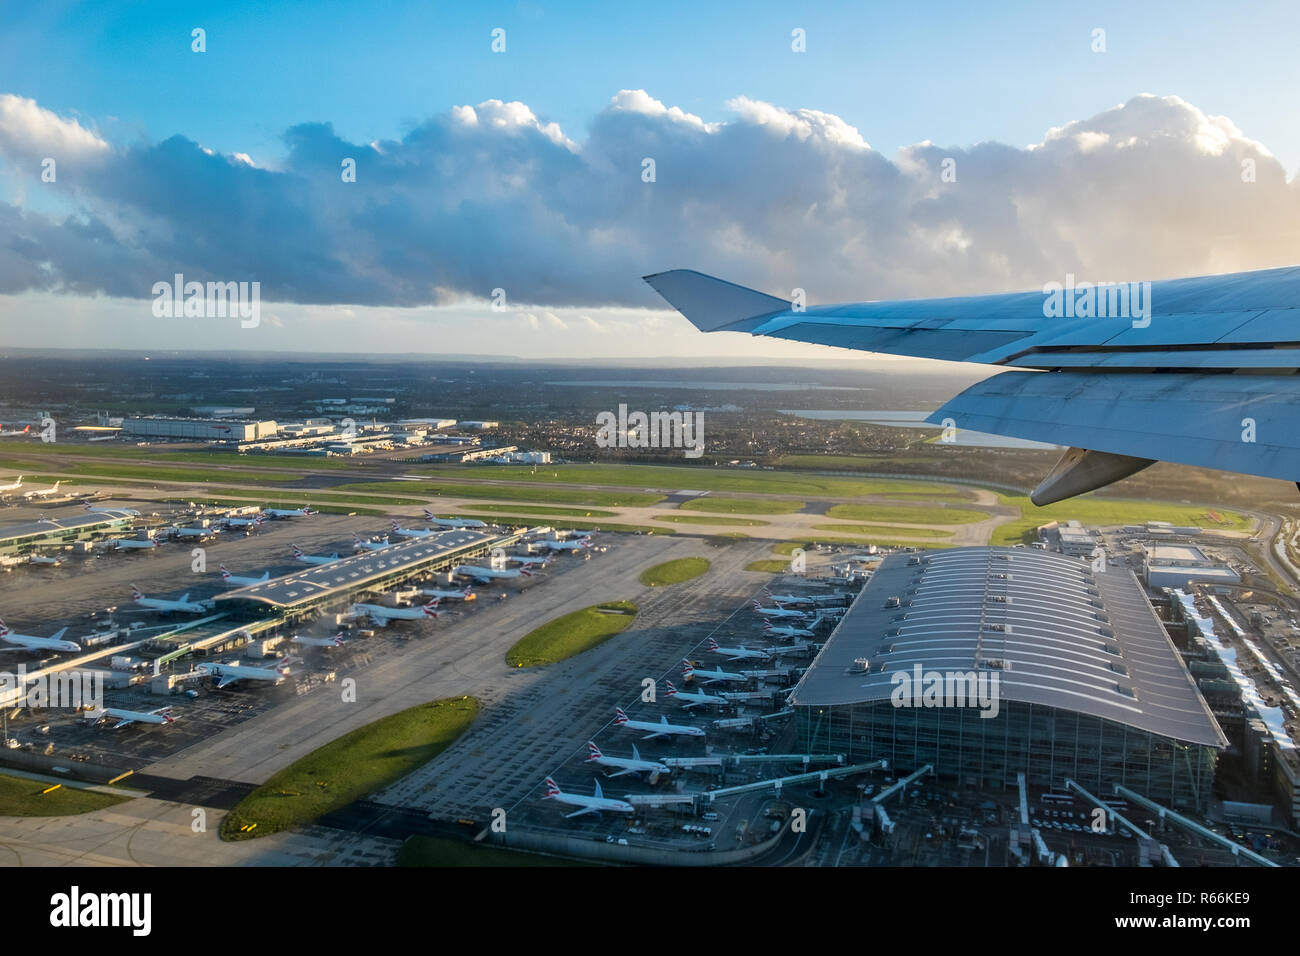 London Heathrow Airport, Terminal 5, aerial view from plane taking off Stock Photo